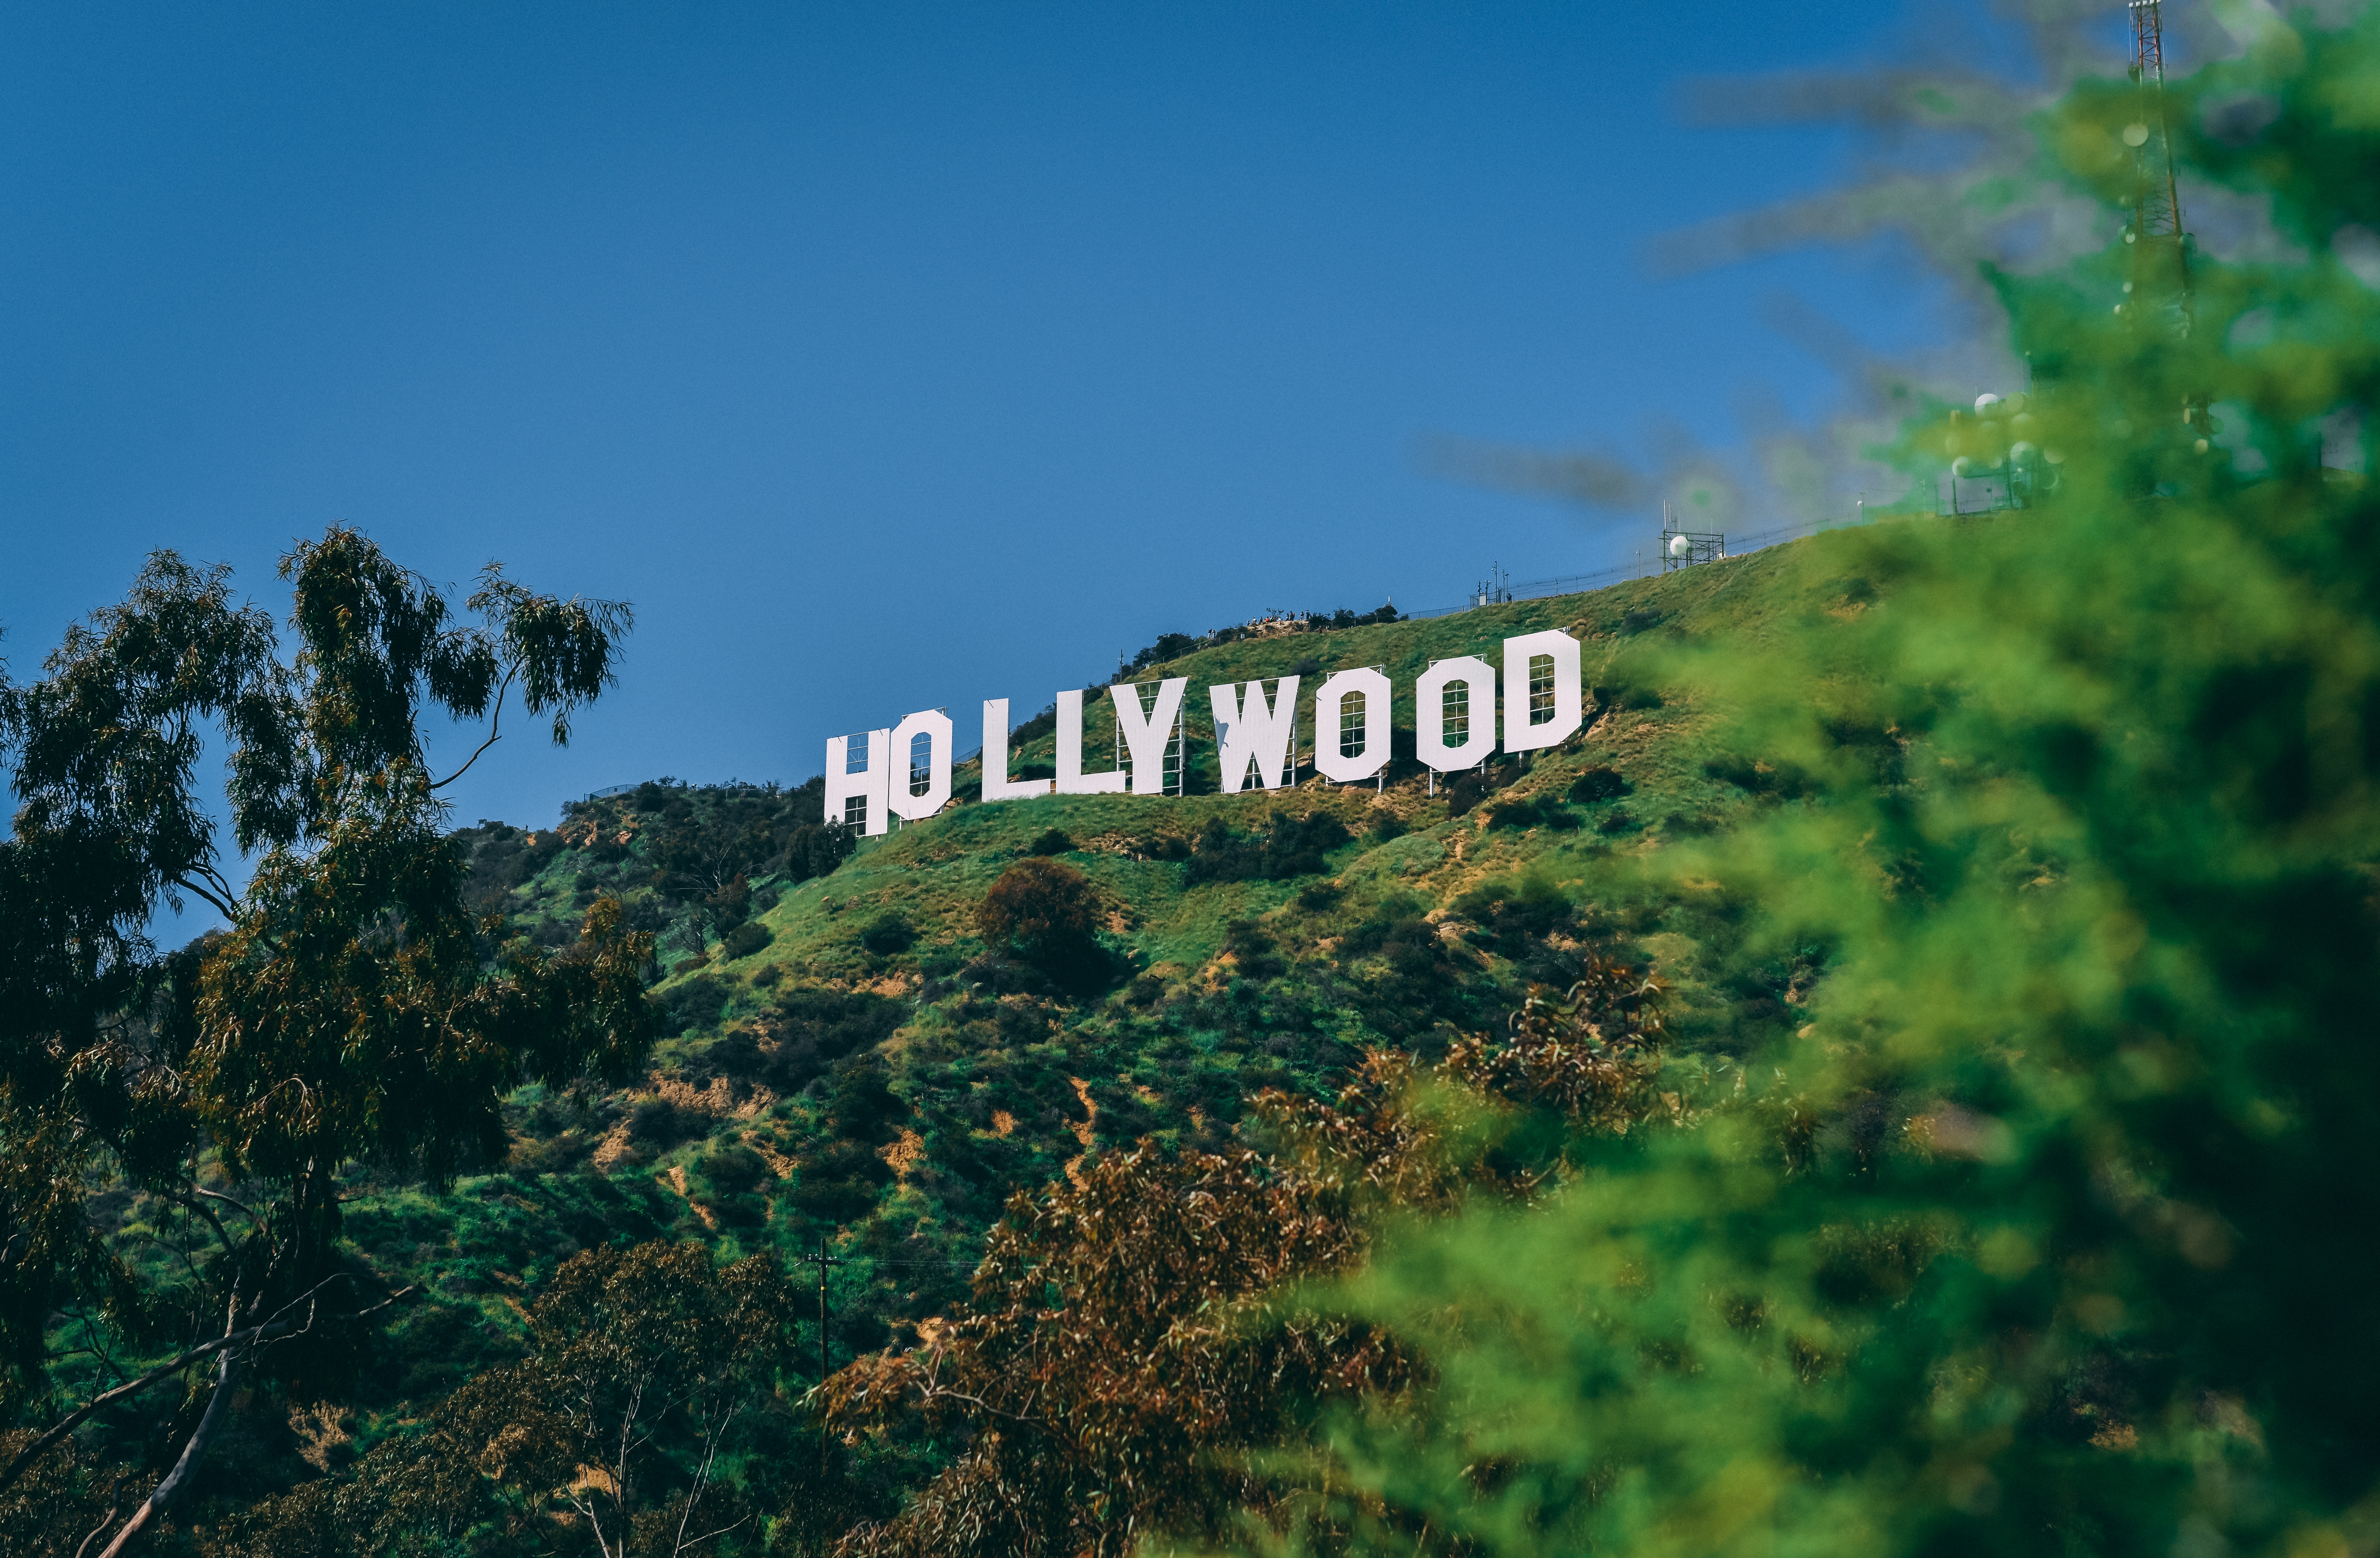 Tour Hollywood for an unforgettable Summer experience 
Los Angeles from 110$